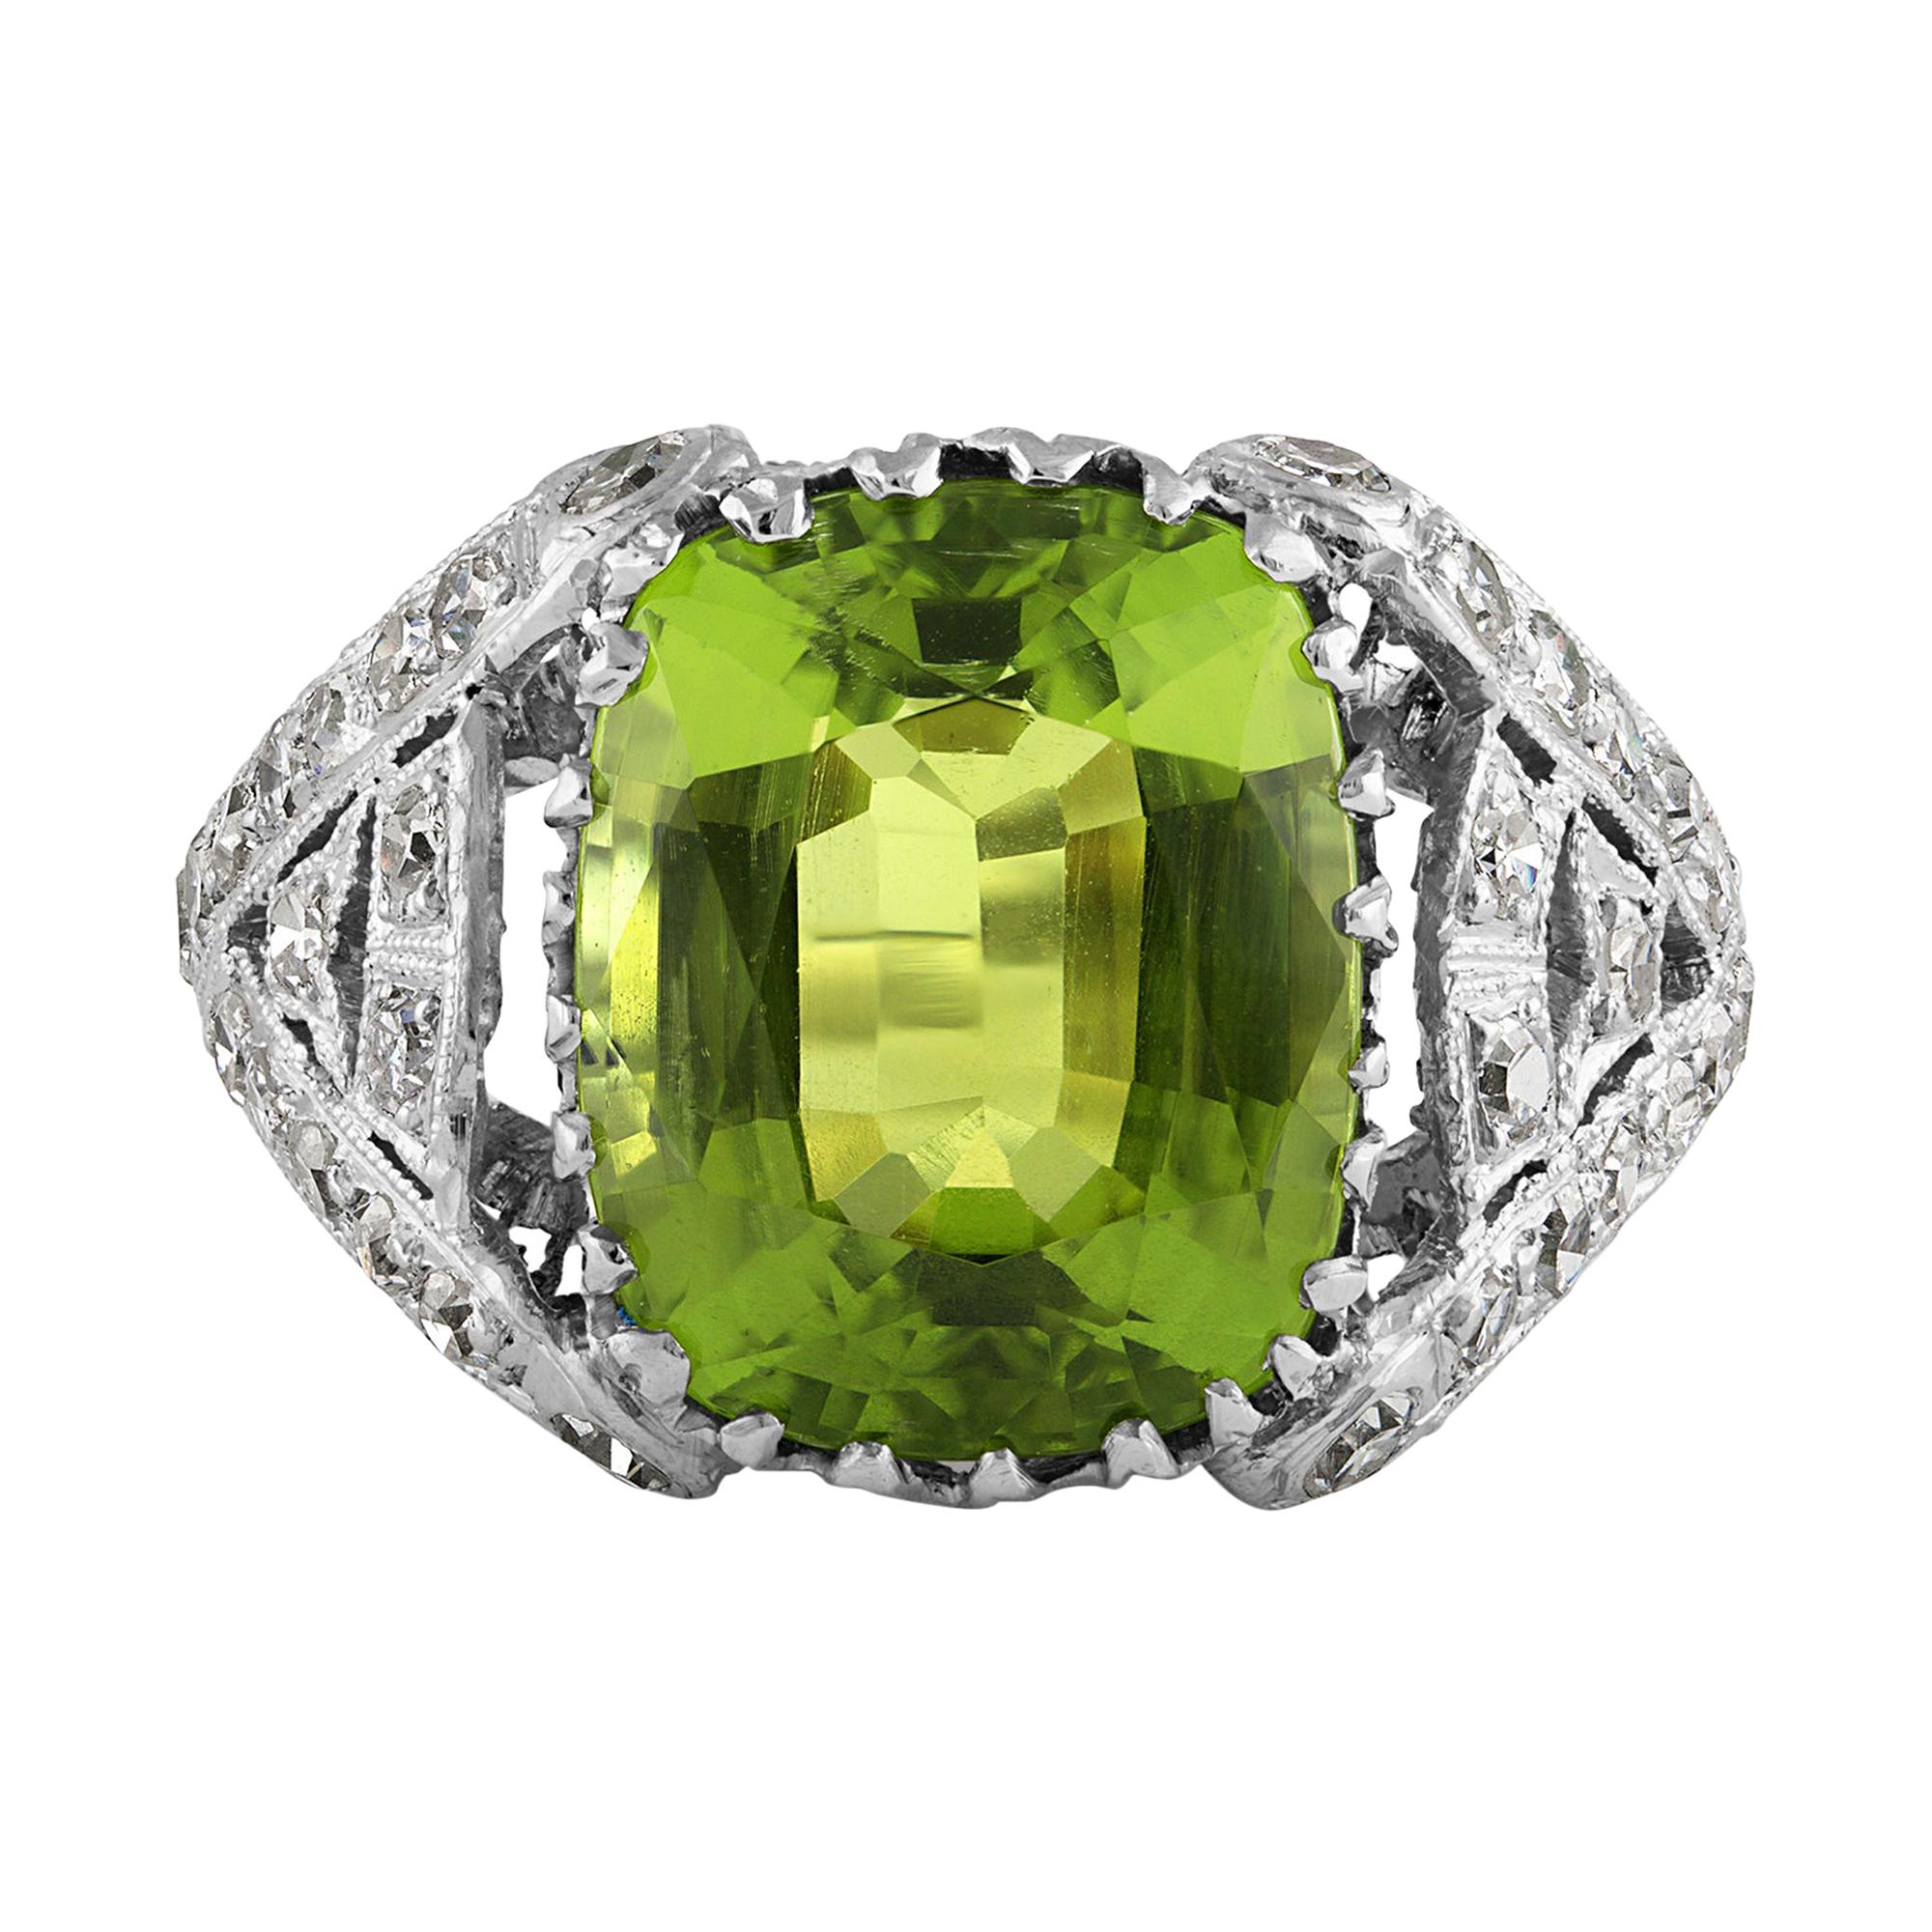 Antique GIA 6.73ct Old Cushion Peridot and Diamond Edwardian Platinum Ring.
From the mid-1800s, Peridot was a favored stone in jewelry, reaching the height of its popularity during the aesthetic period of the Victorian era and the reign of Edward